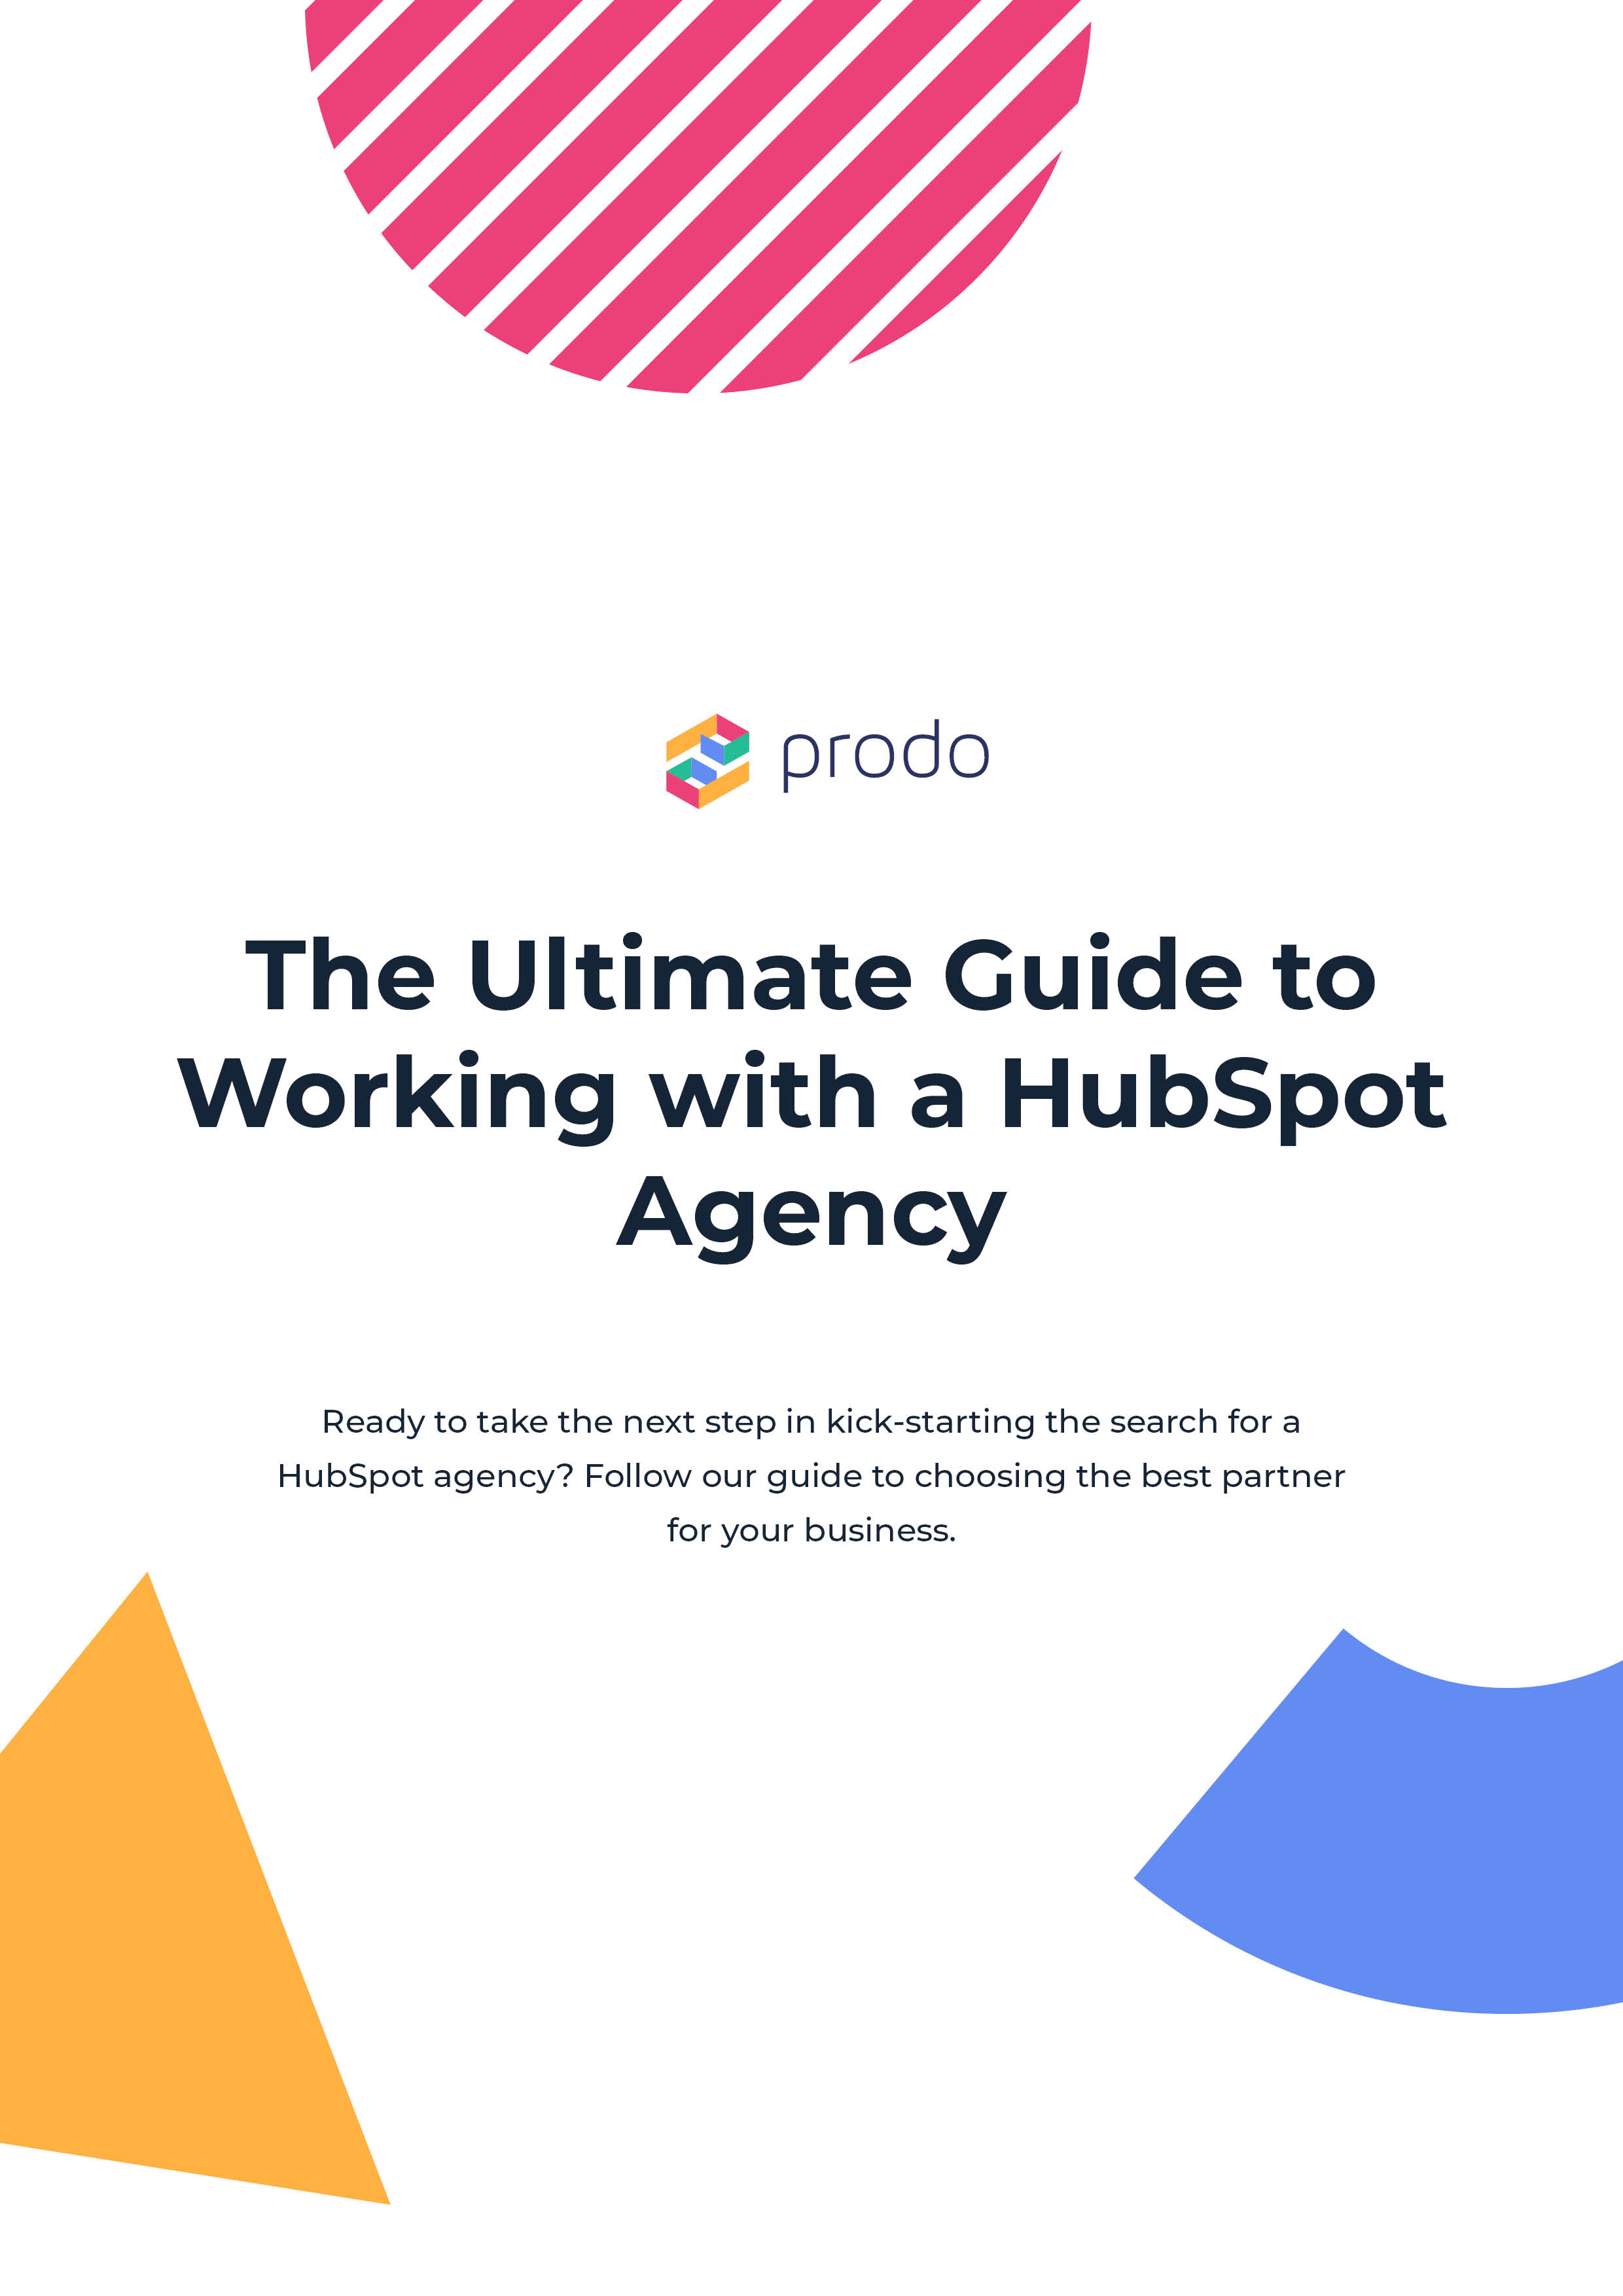 The ultimate guide to working with an inbound marketing agency